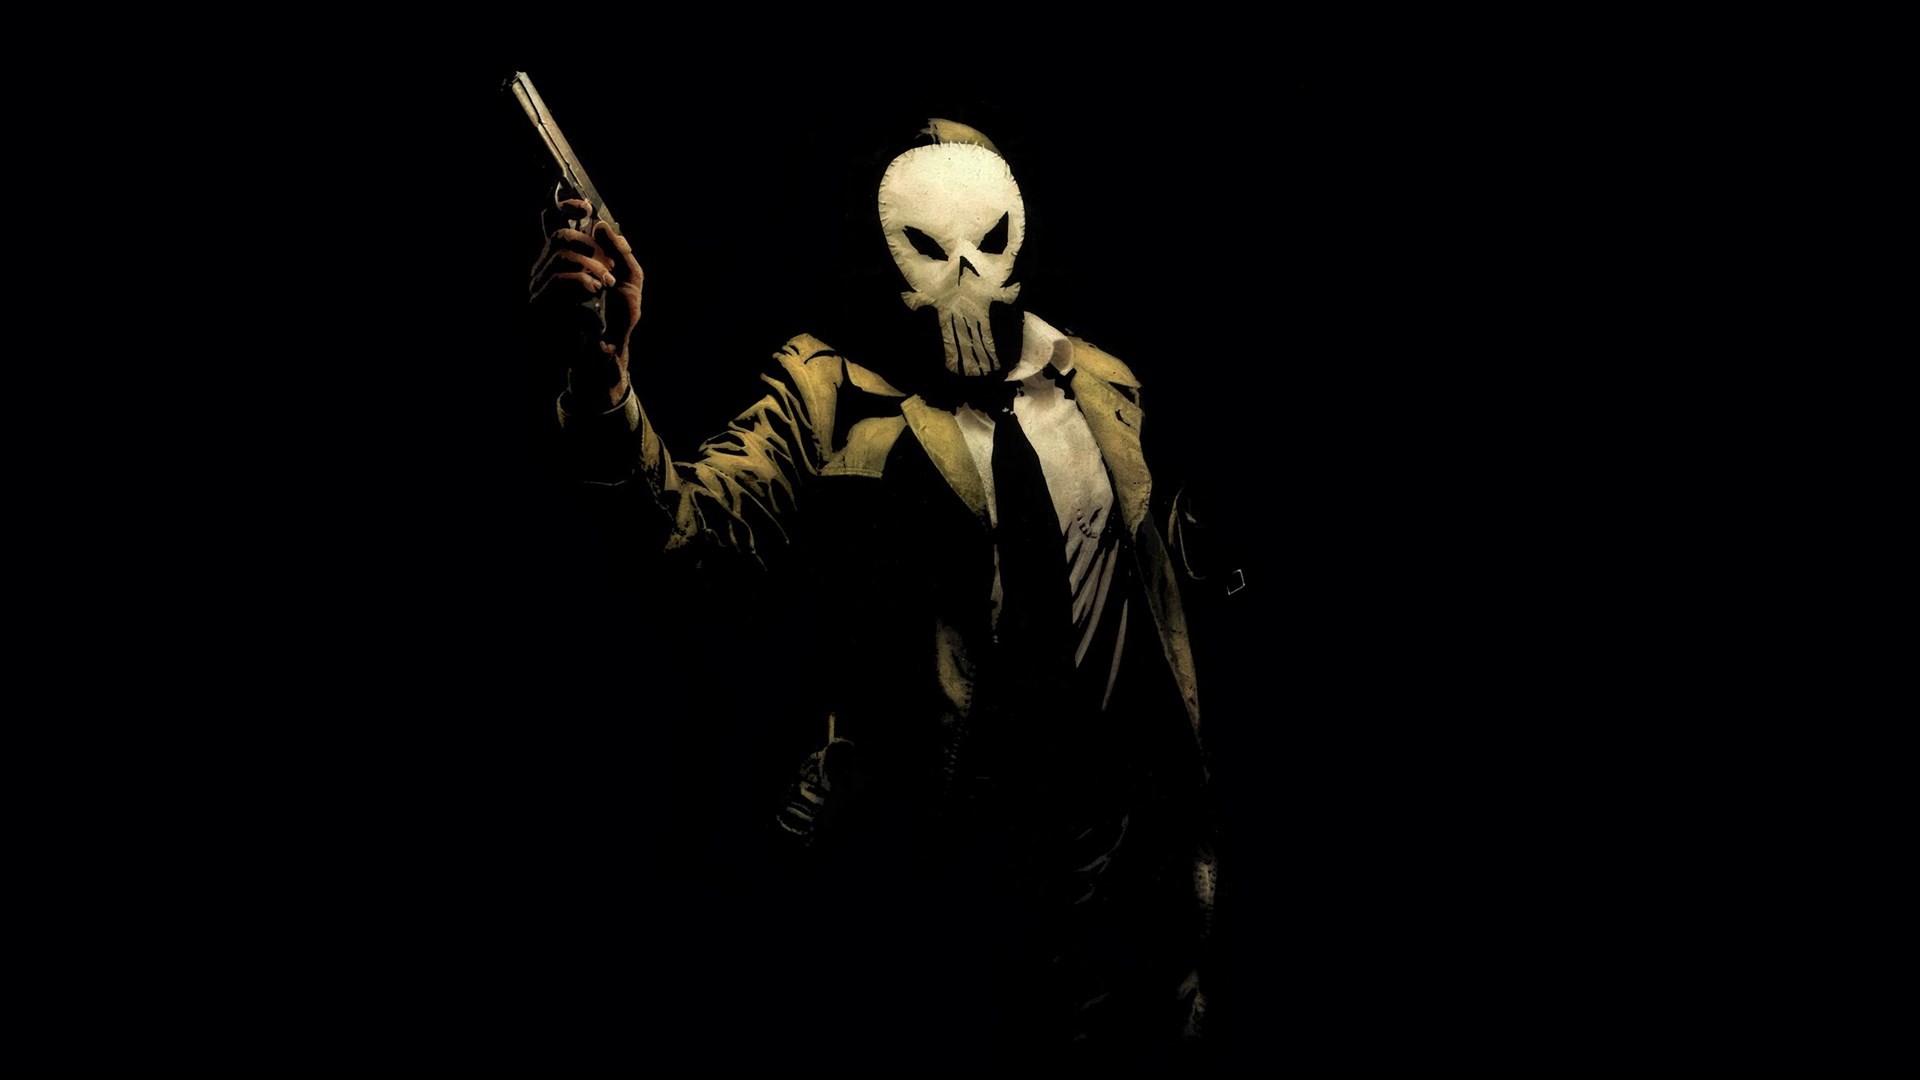 1920x1080 The Punisher Wallpapers Desktop K HD Backgrounds Fungyung | HD Wallpapers |  Pinterest | Punisher and Wallpaper